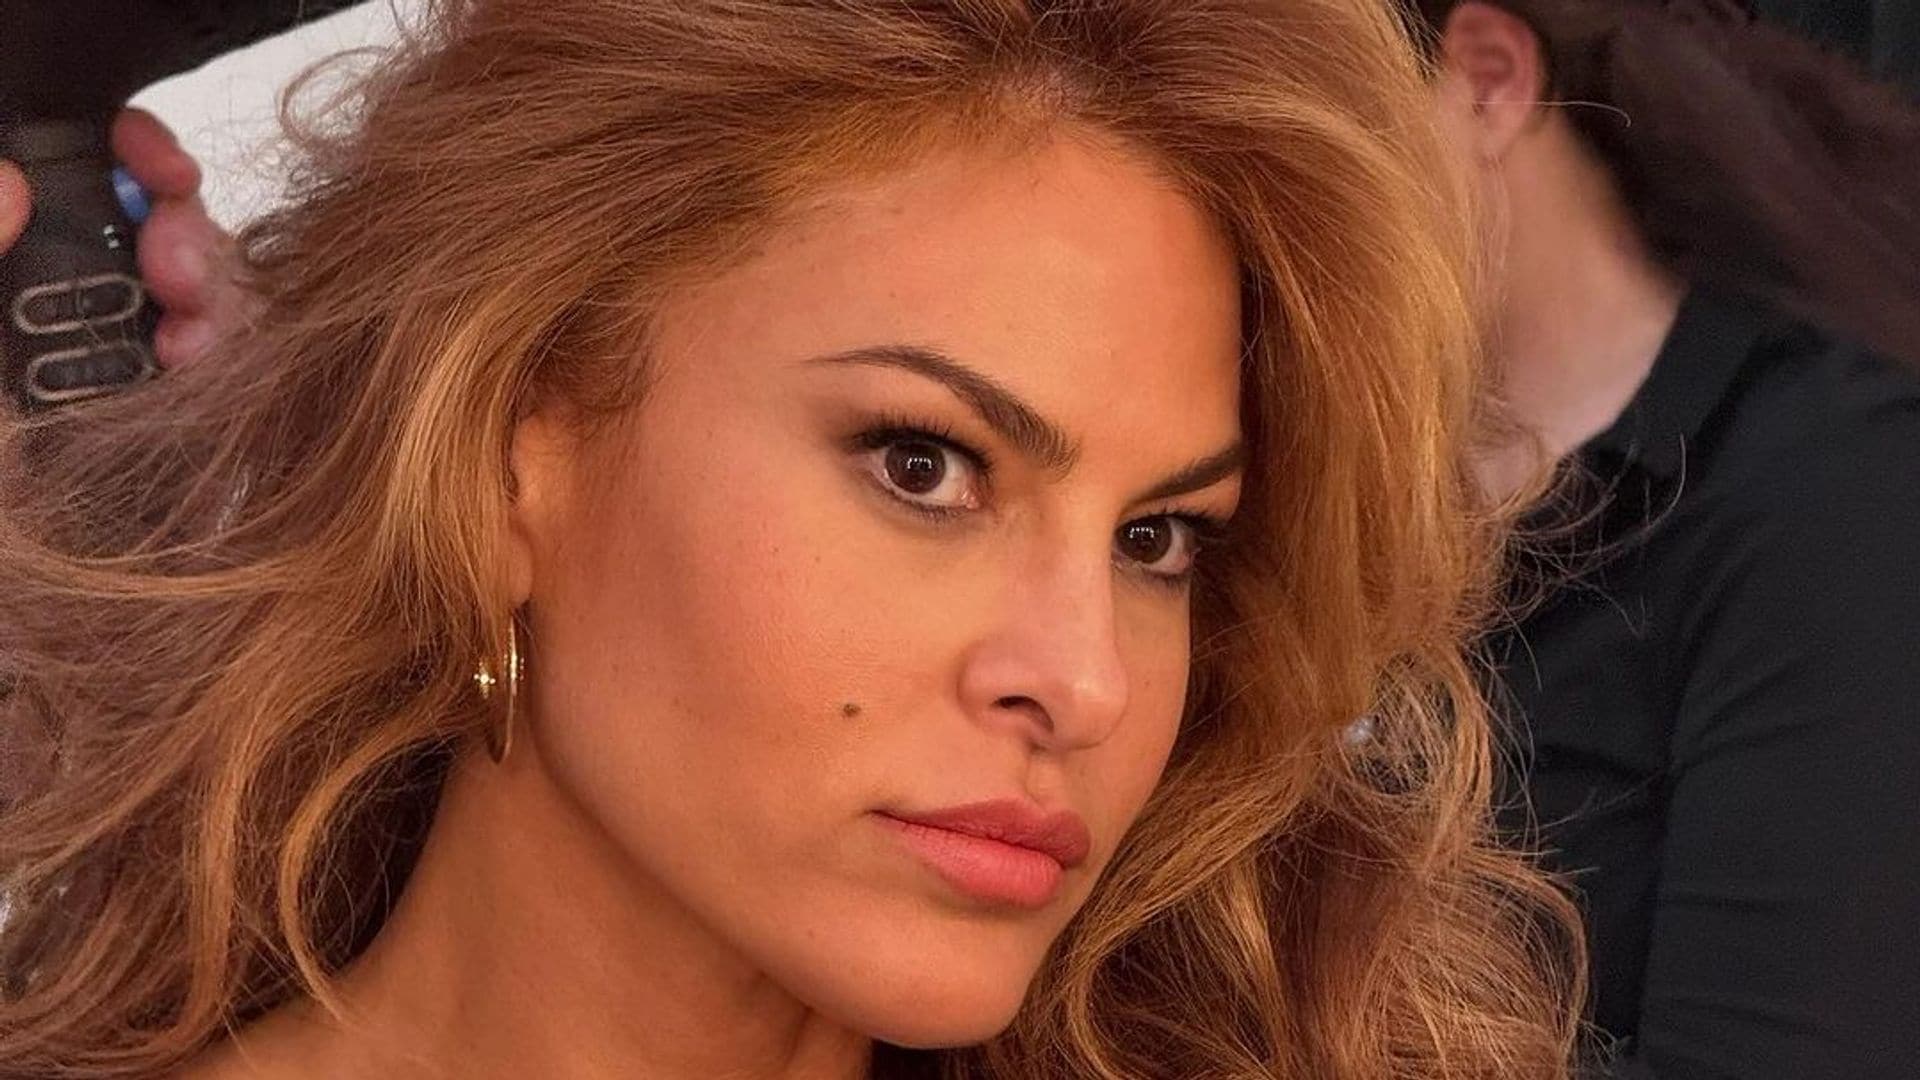 Eva Mendes shows off her summer look in new photos: 'Summer is where I live'